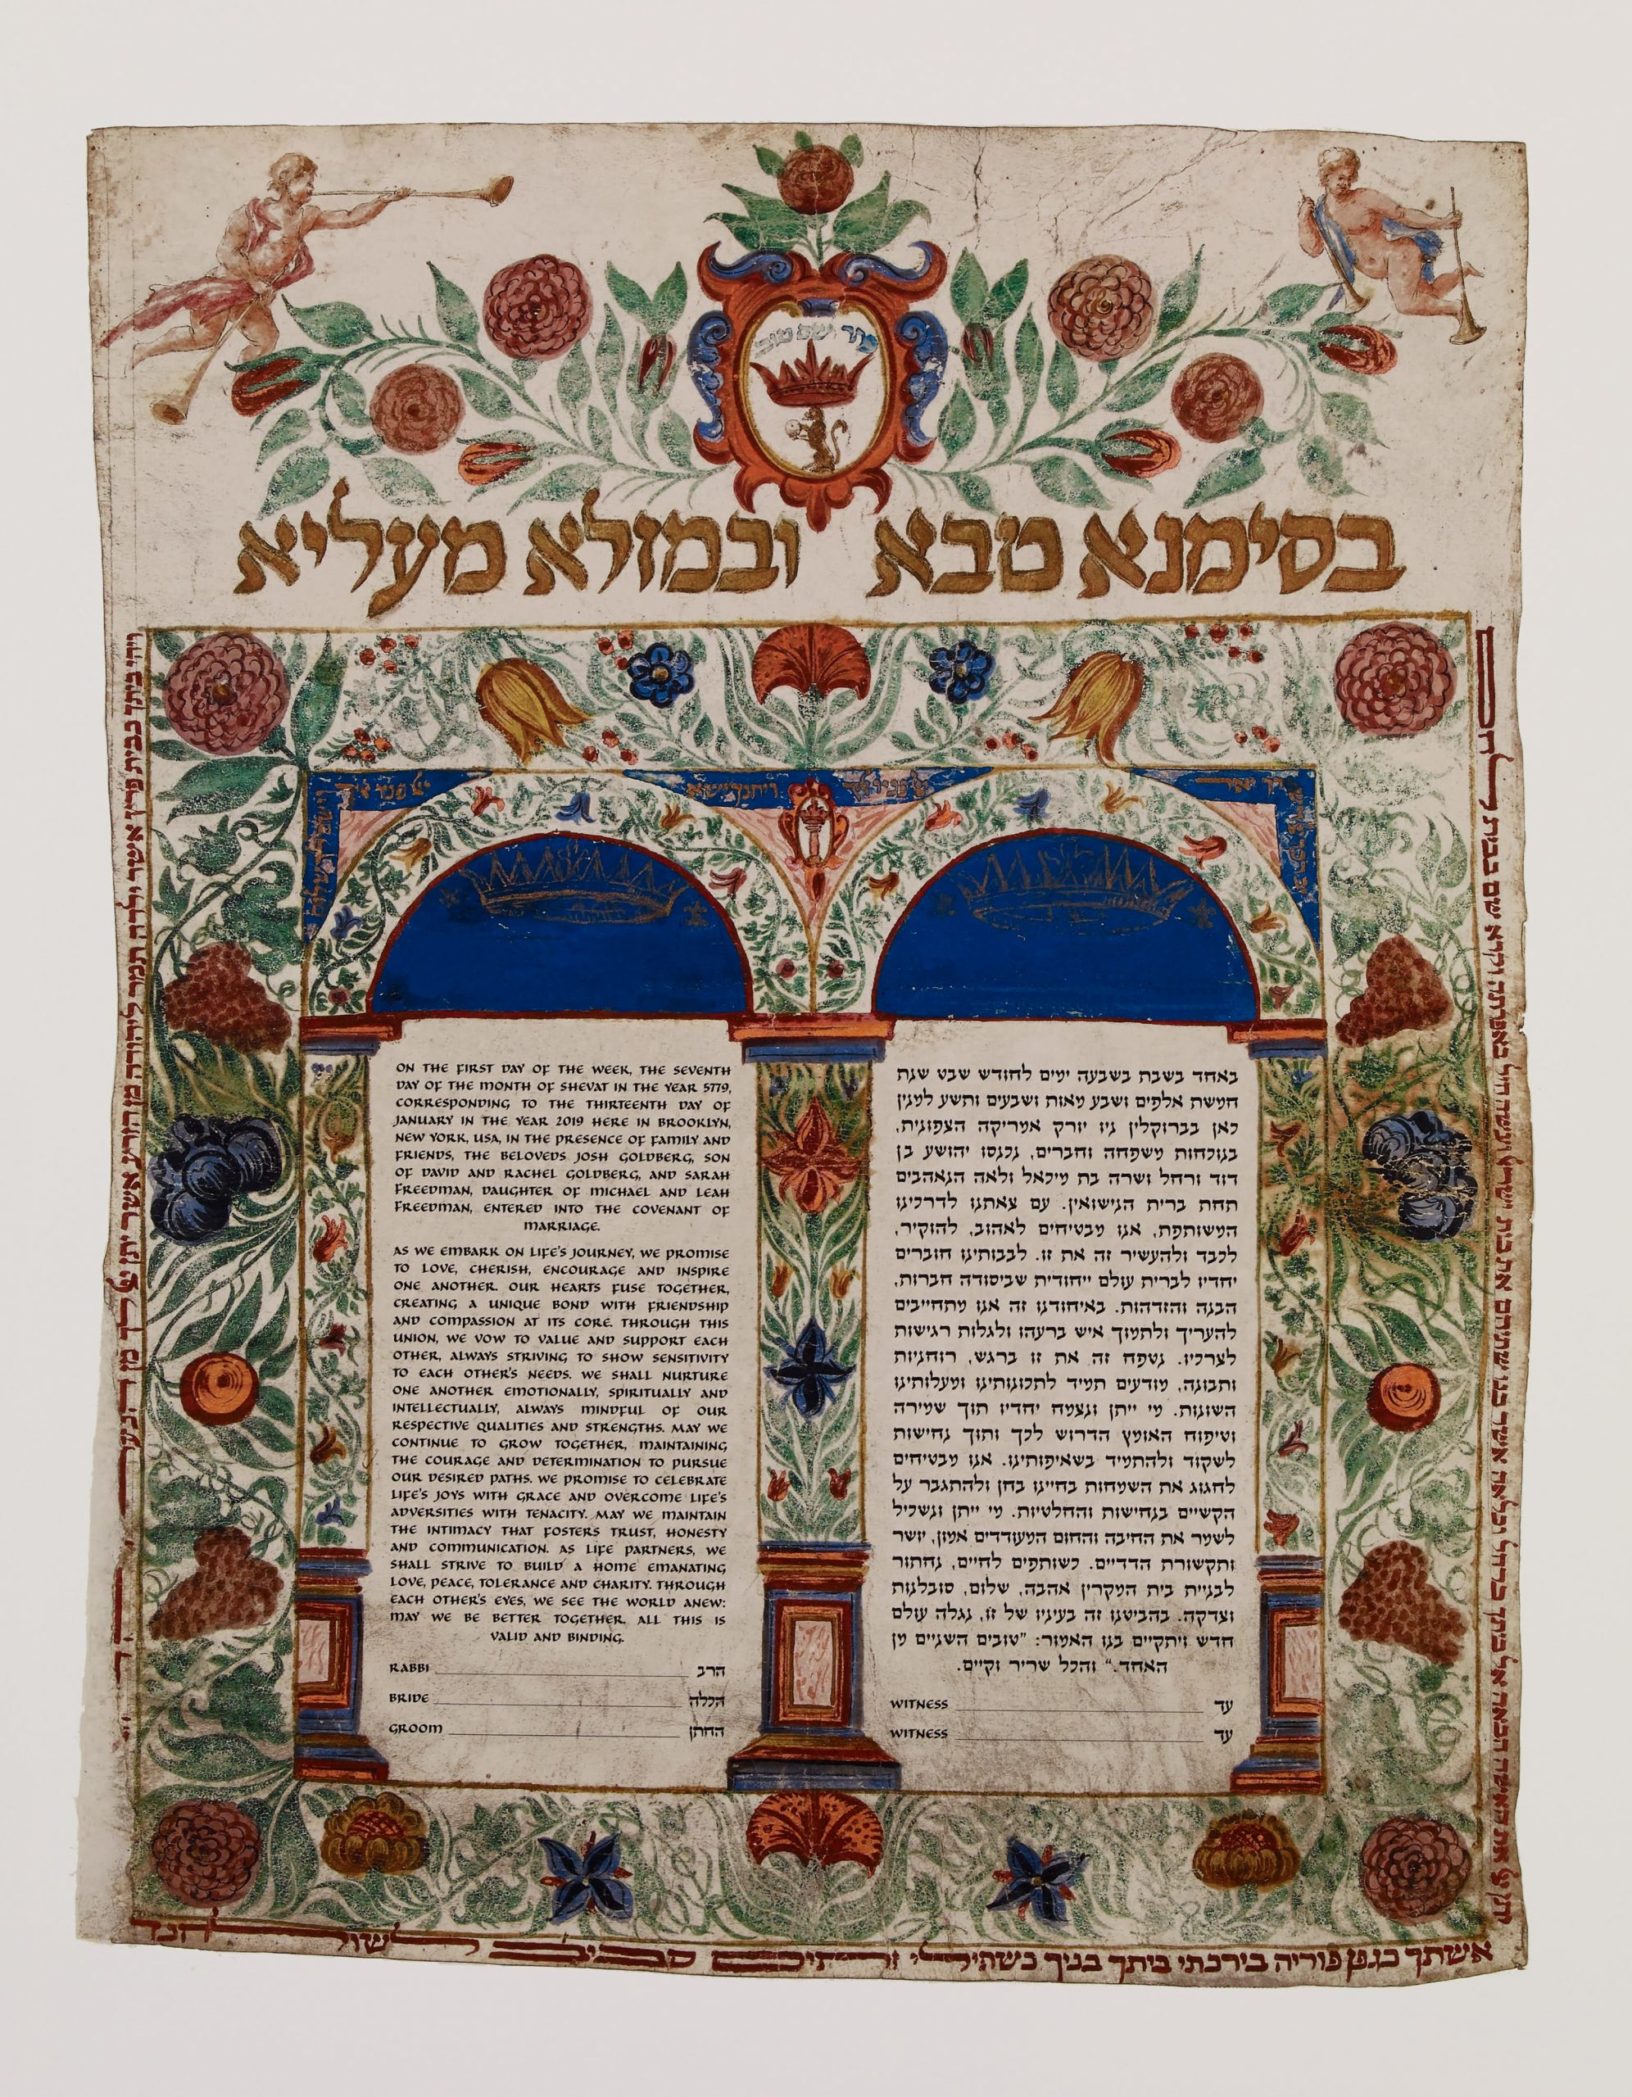 Pisa, Italy, 1721 Ketubah Online by The Jewish Museum